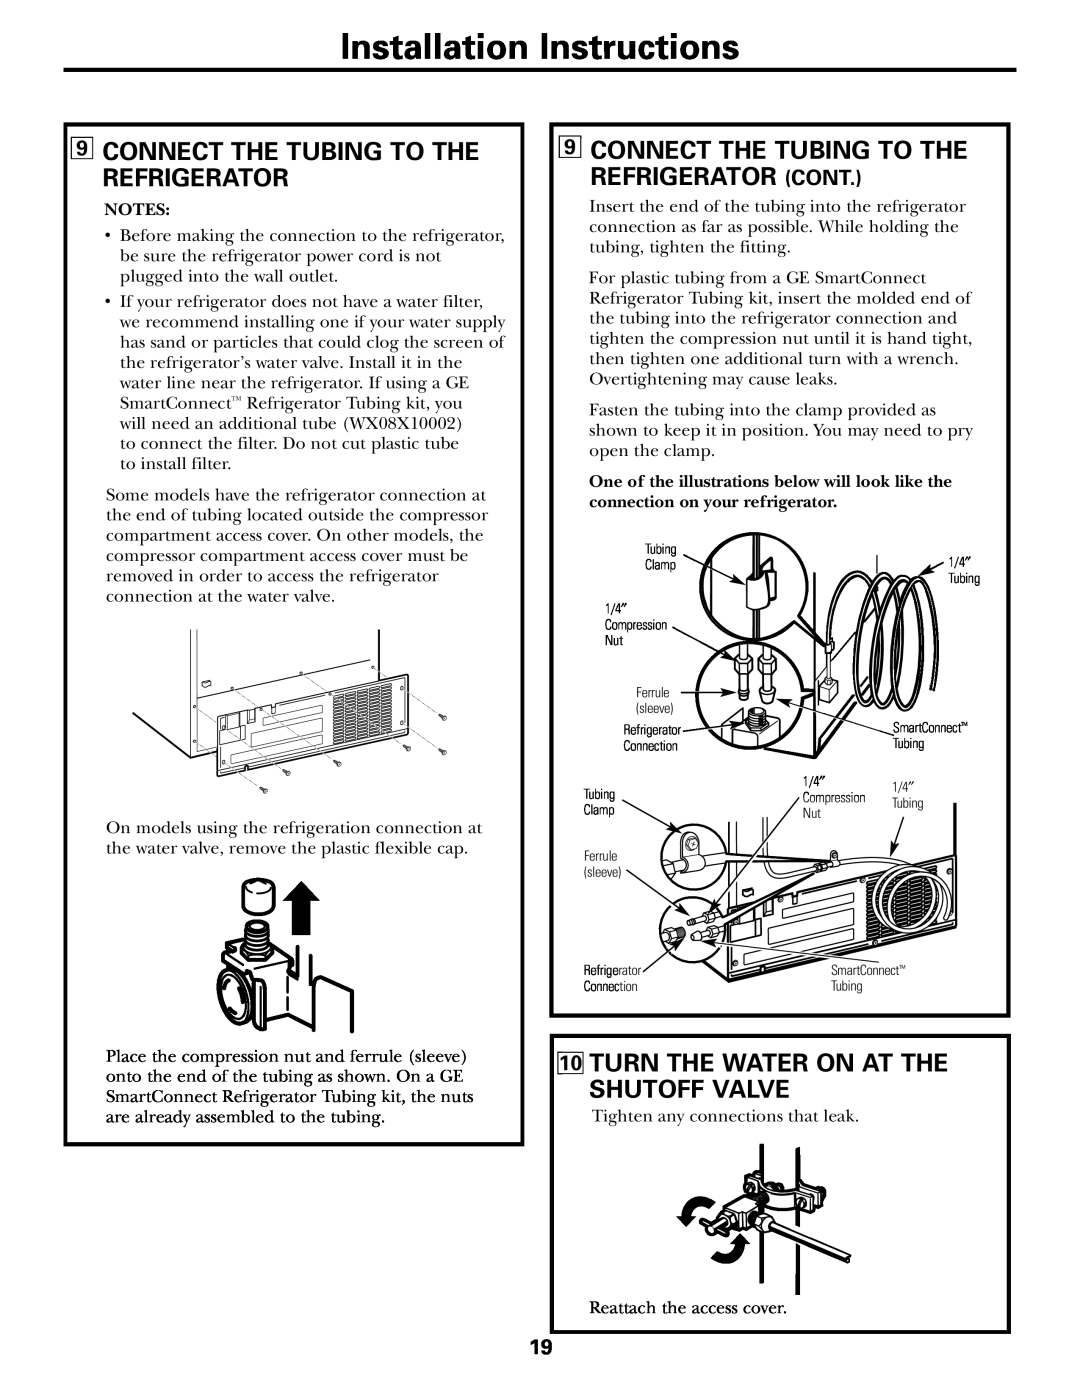 GE 20 9CONNECT THE TUBING TO THE REFRIGERATOR CONT, Turn The Water On At The Shutoff Valve, Installation Instructions 